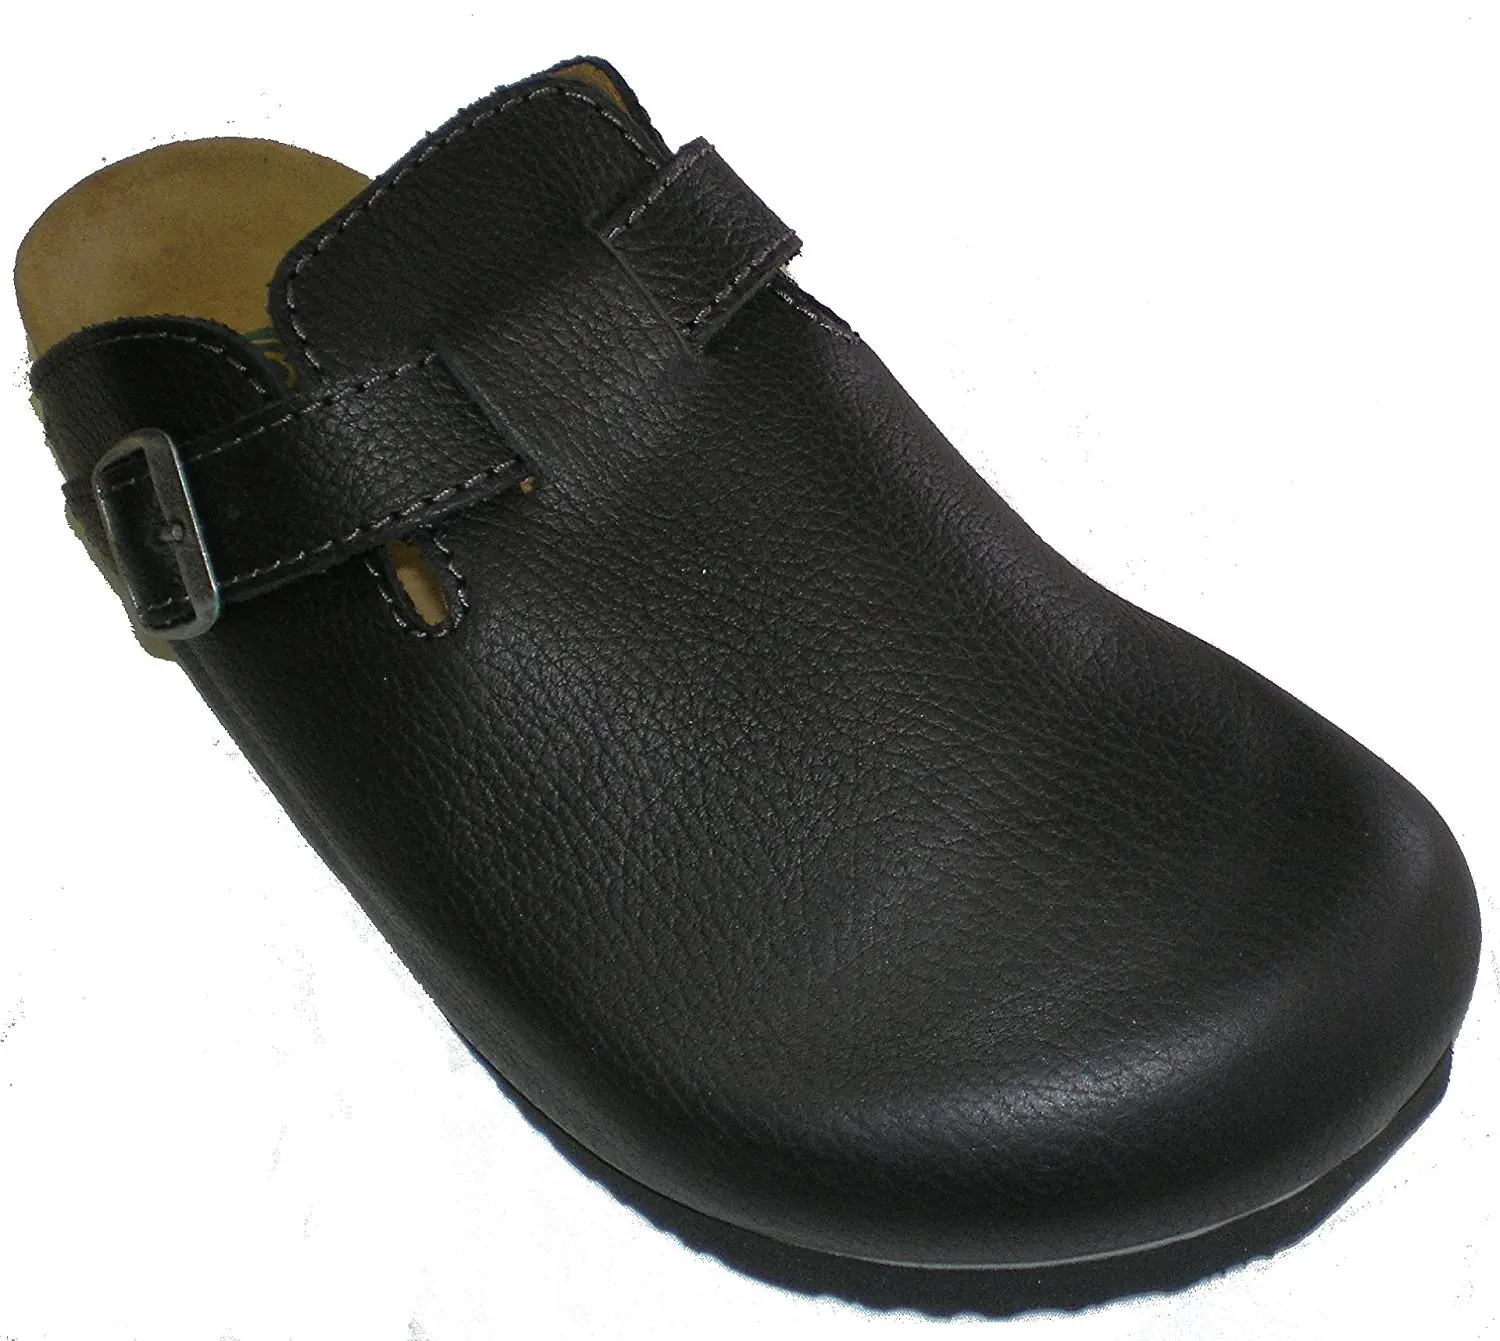 Buy Dr.Brinkmann Mens Leather Clogs & Mules in Cheap Price on Alibaba.com